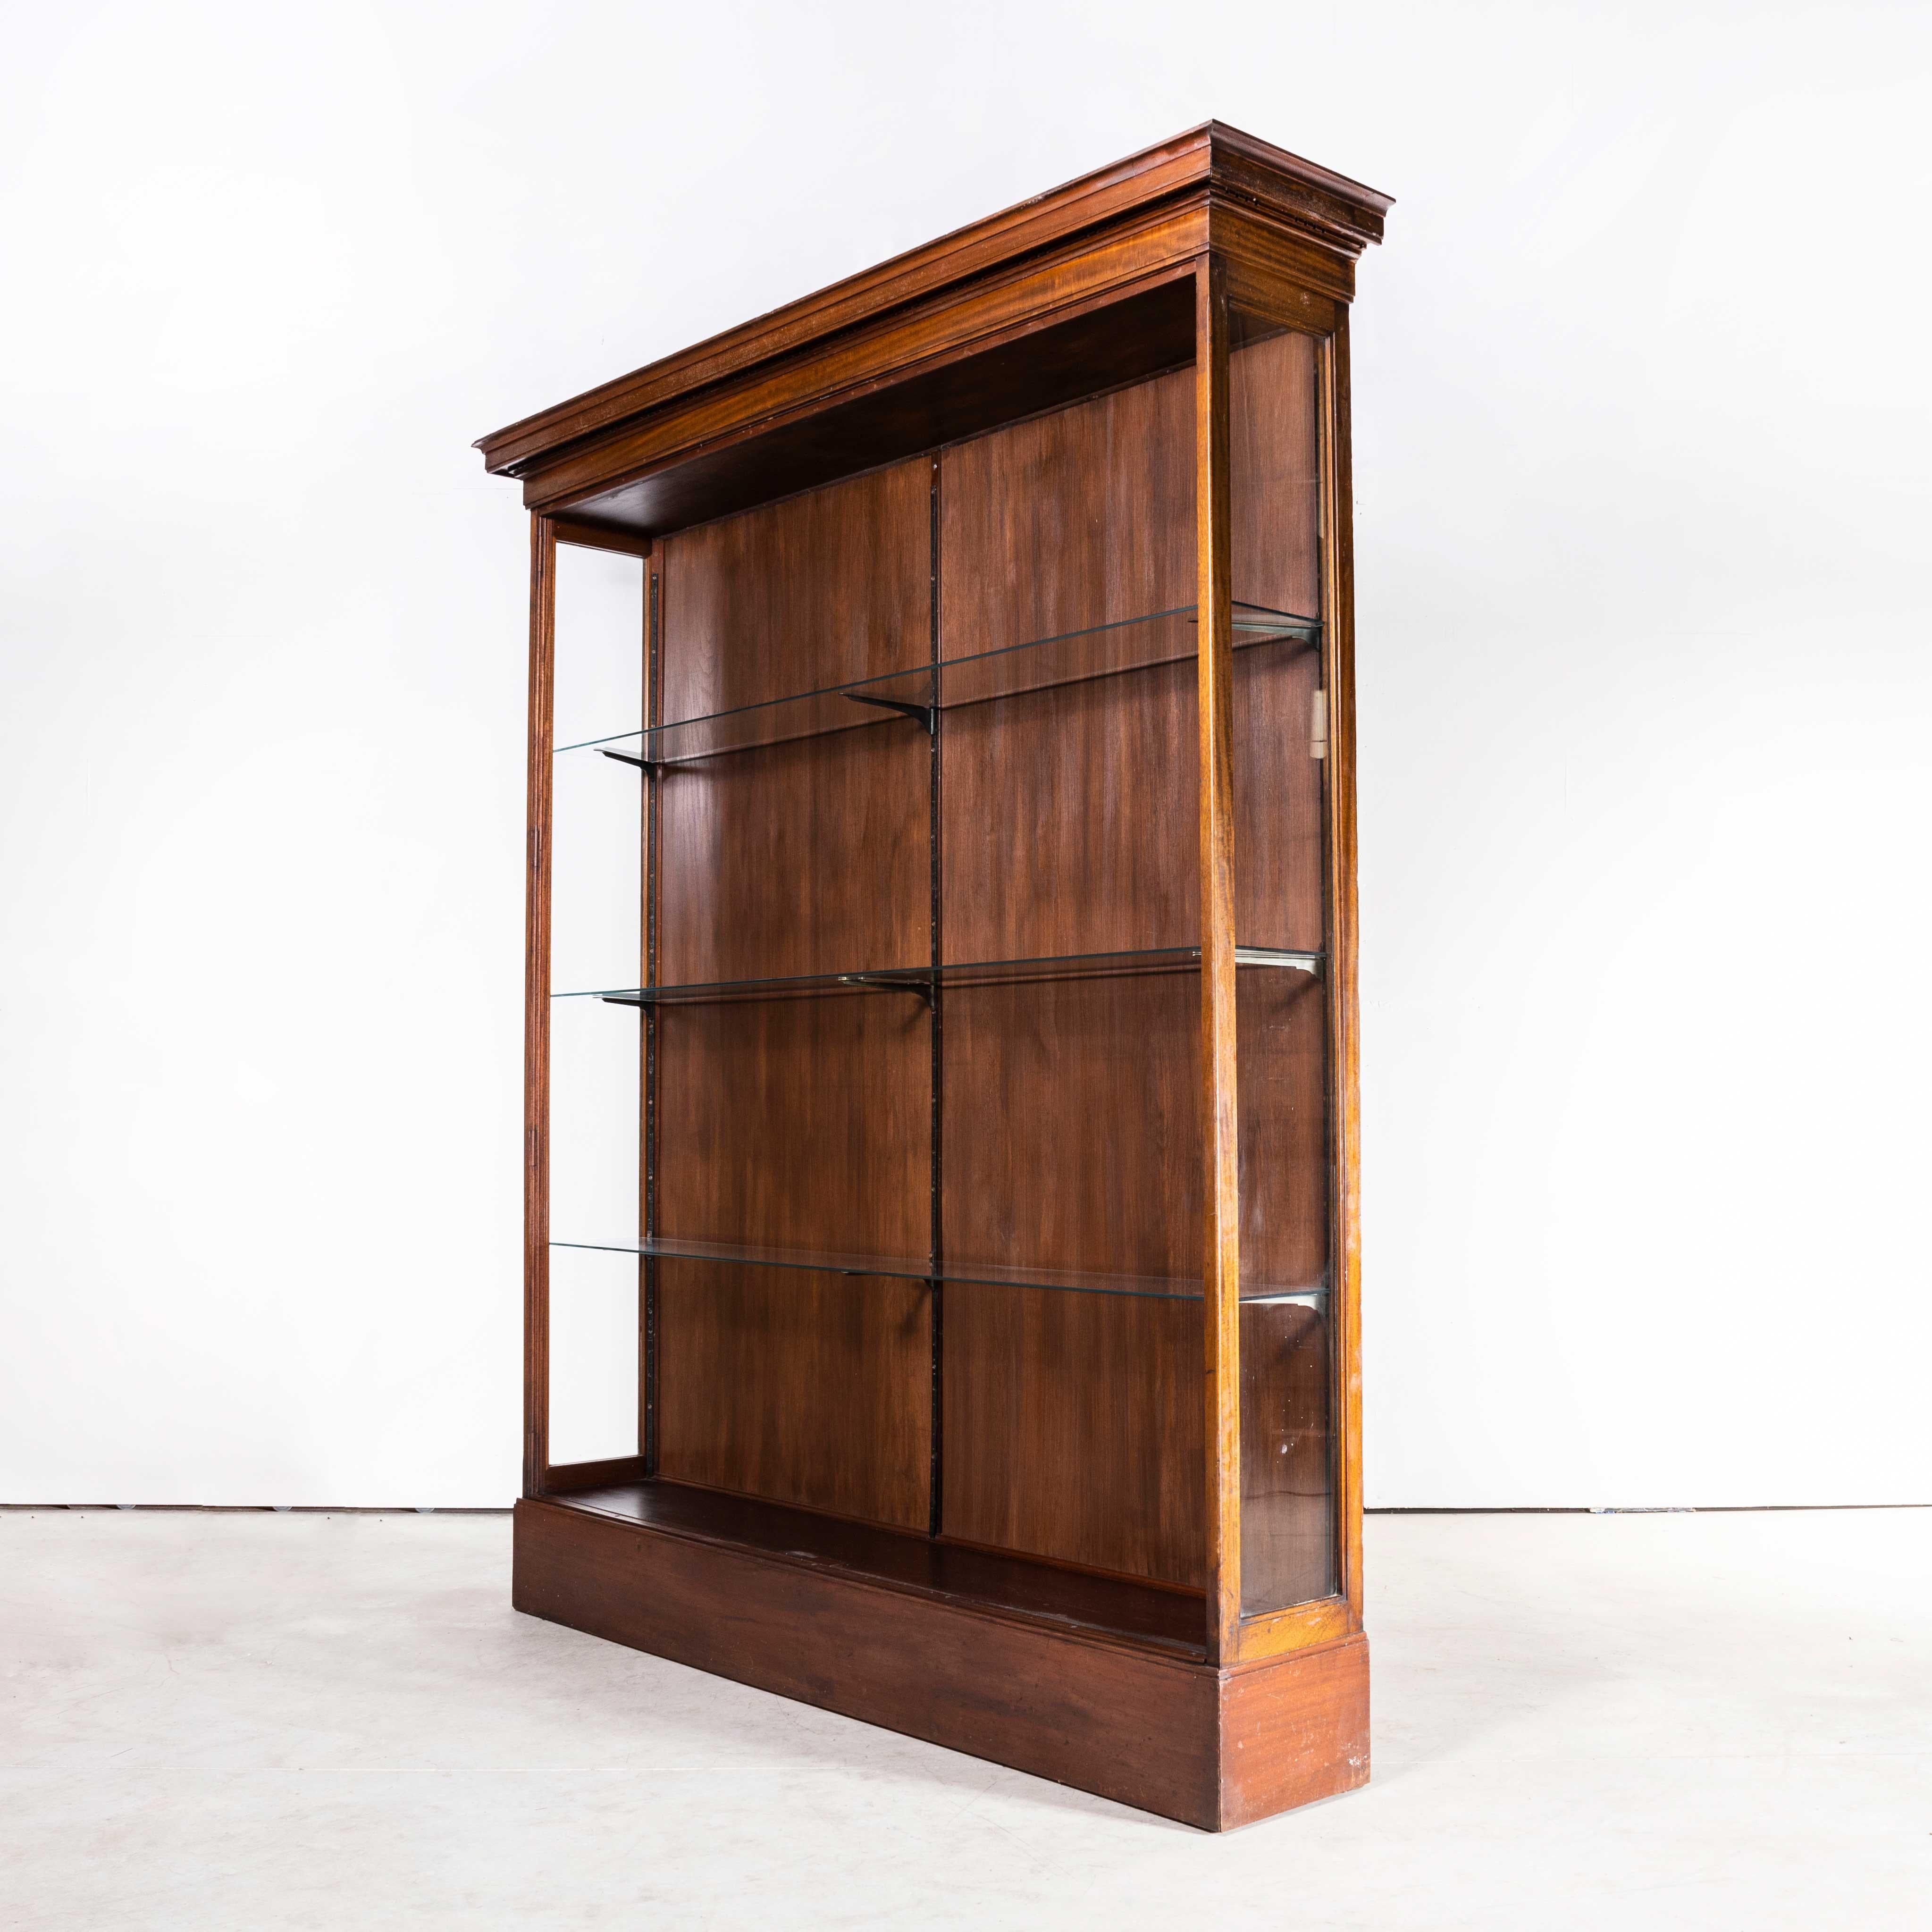 19th Century substantial English display cabinet
19th Century substantial English display cabinet. Exceptional original Victorian display cabinet from the late 19th Century. Made principally in solid mahogany it is exceptionally well made and